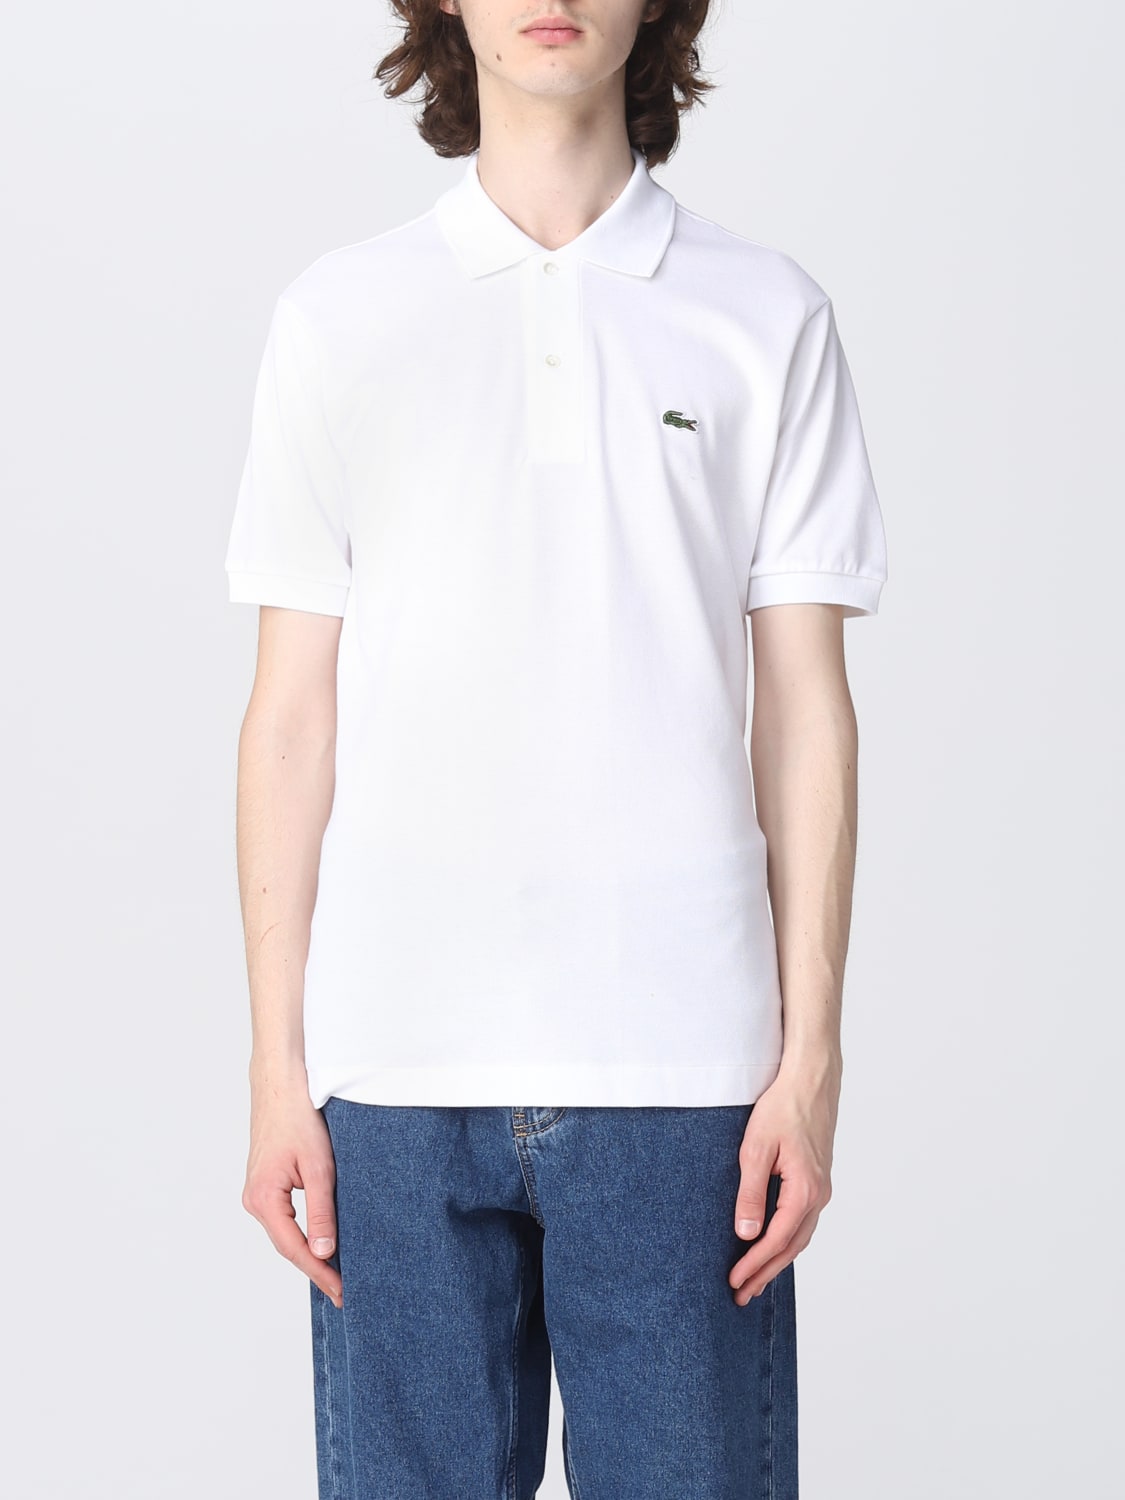 Lacoste Outlet: polo shirt for man - White | Lacoste shirt AB1212 online GIGLIO.COM